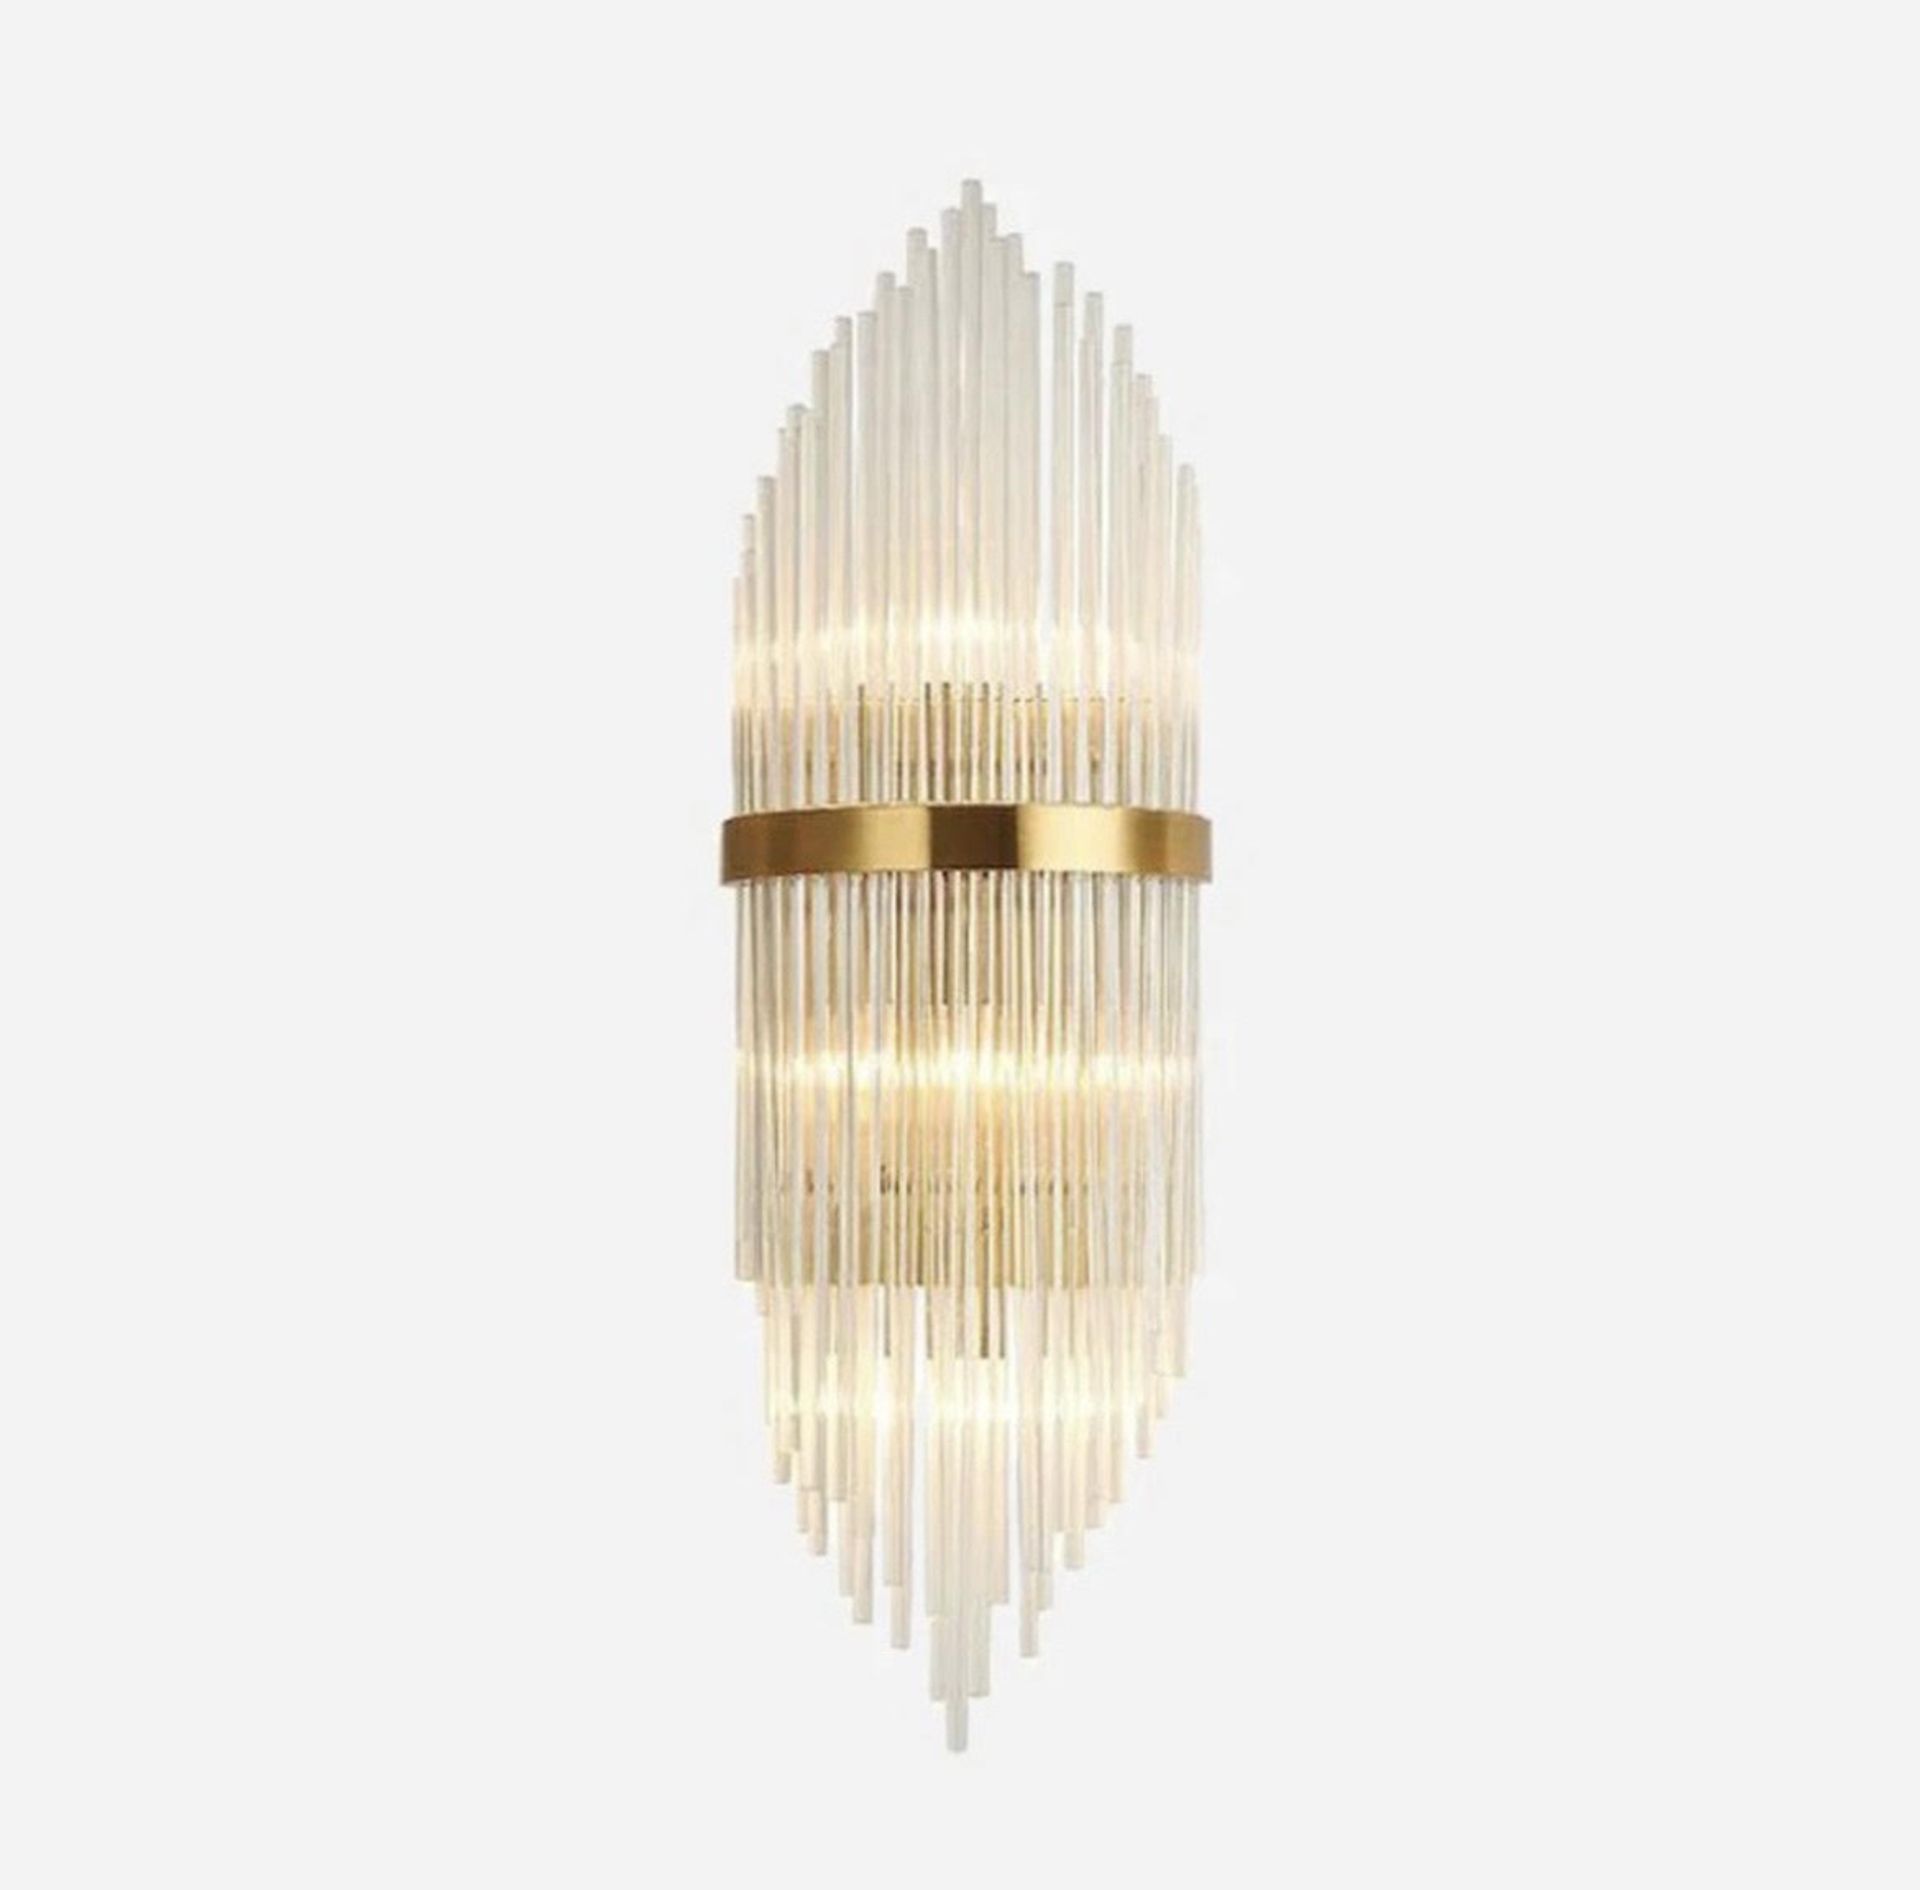 Oriana Crystal Wall Light This exquisite wall sconce is in an antique brass finish. The frame is